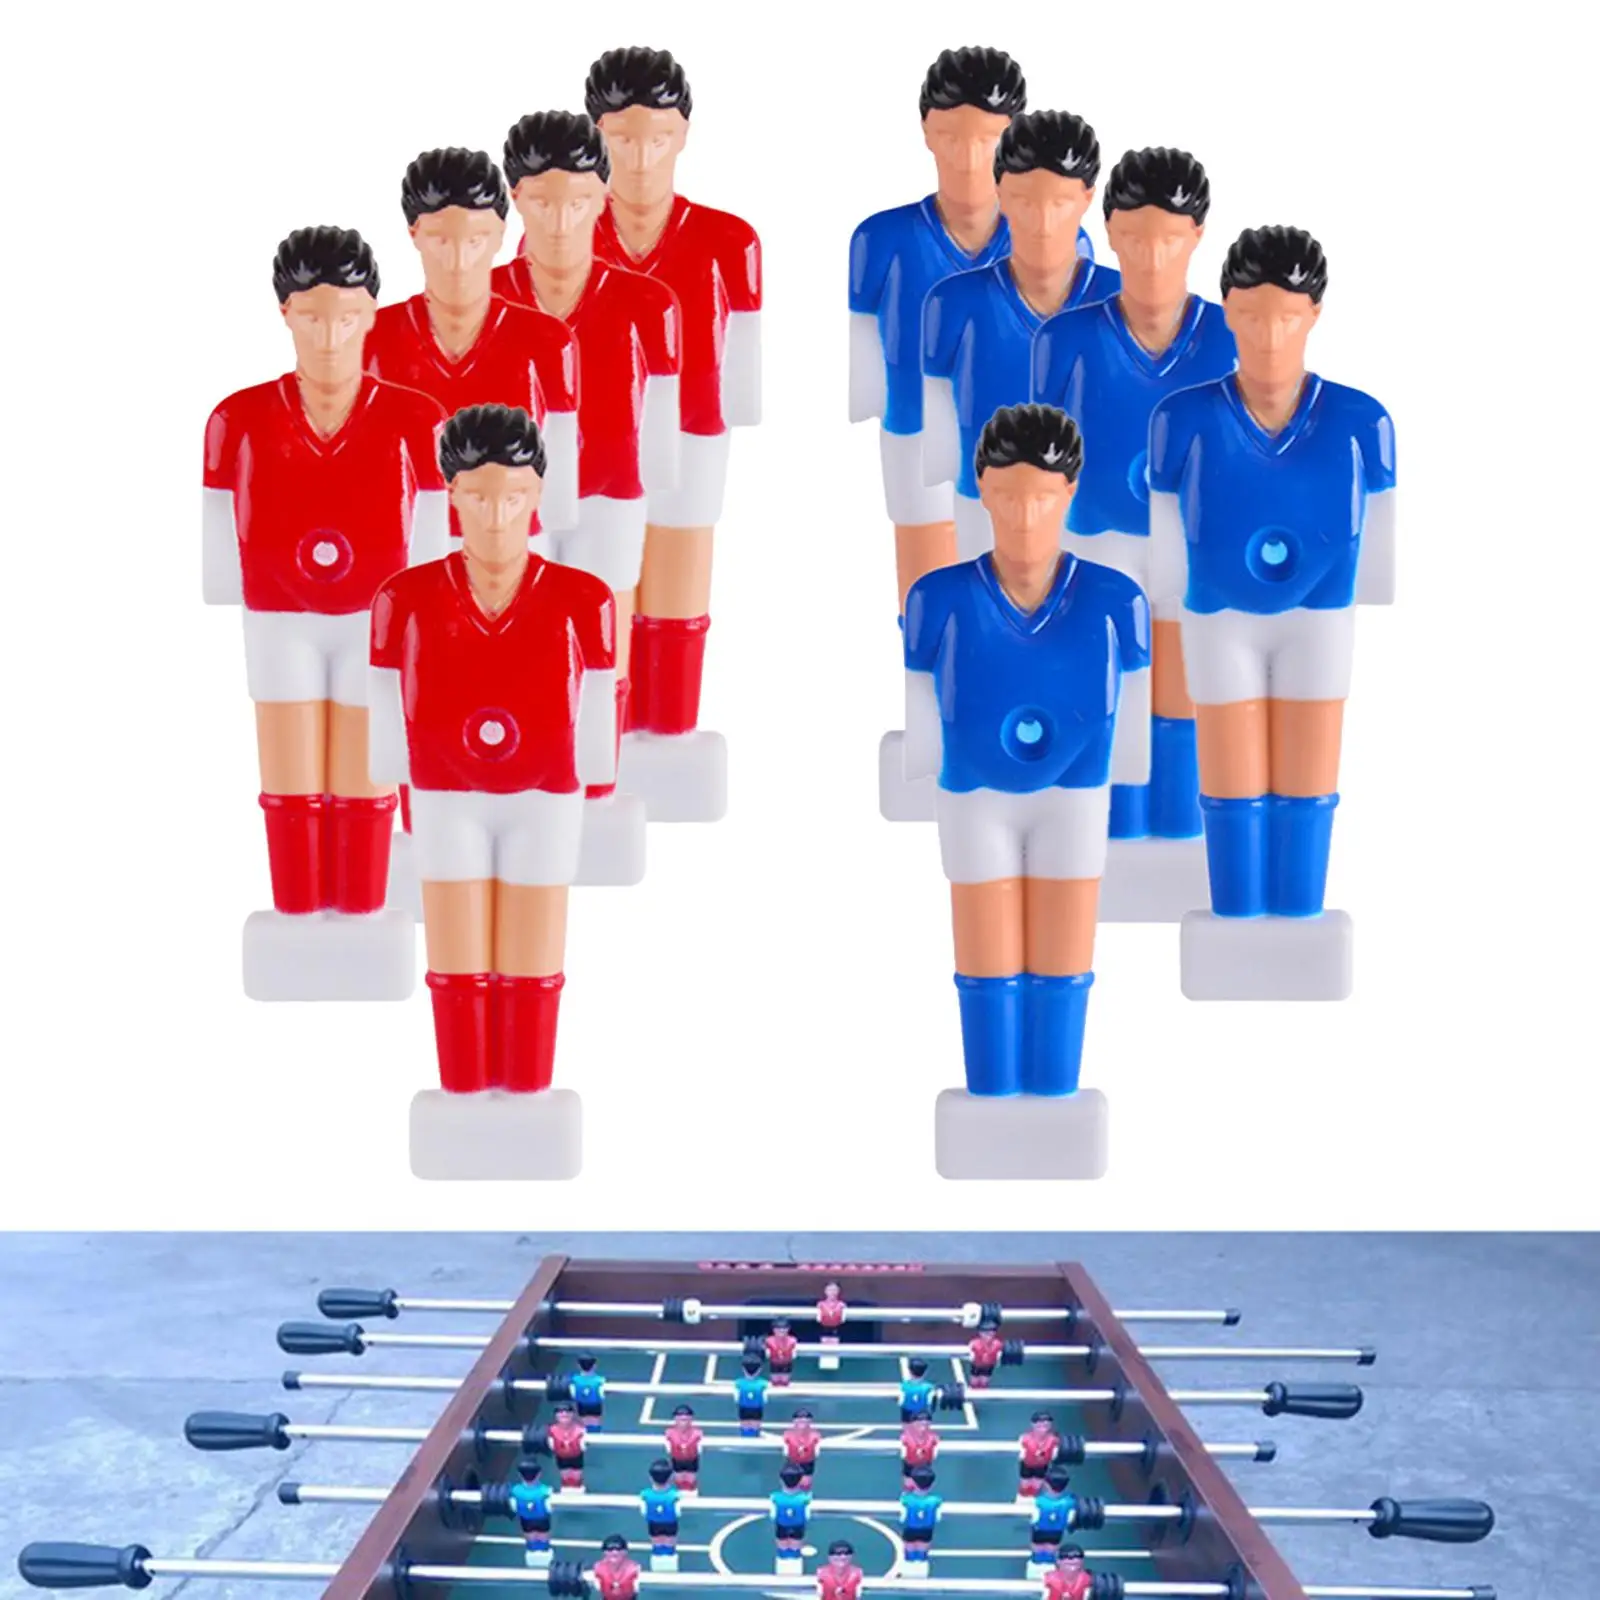 Foosball Balls Replacement 10 Foosball Parts Soccer Games Replacement Foosball Foosball Player Foosball Table Accessories